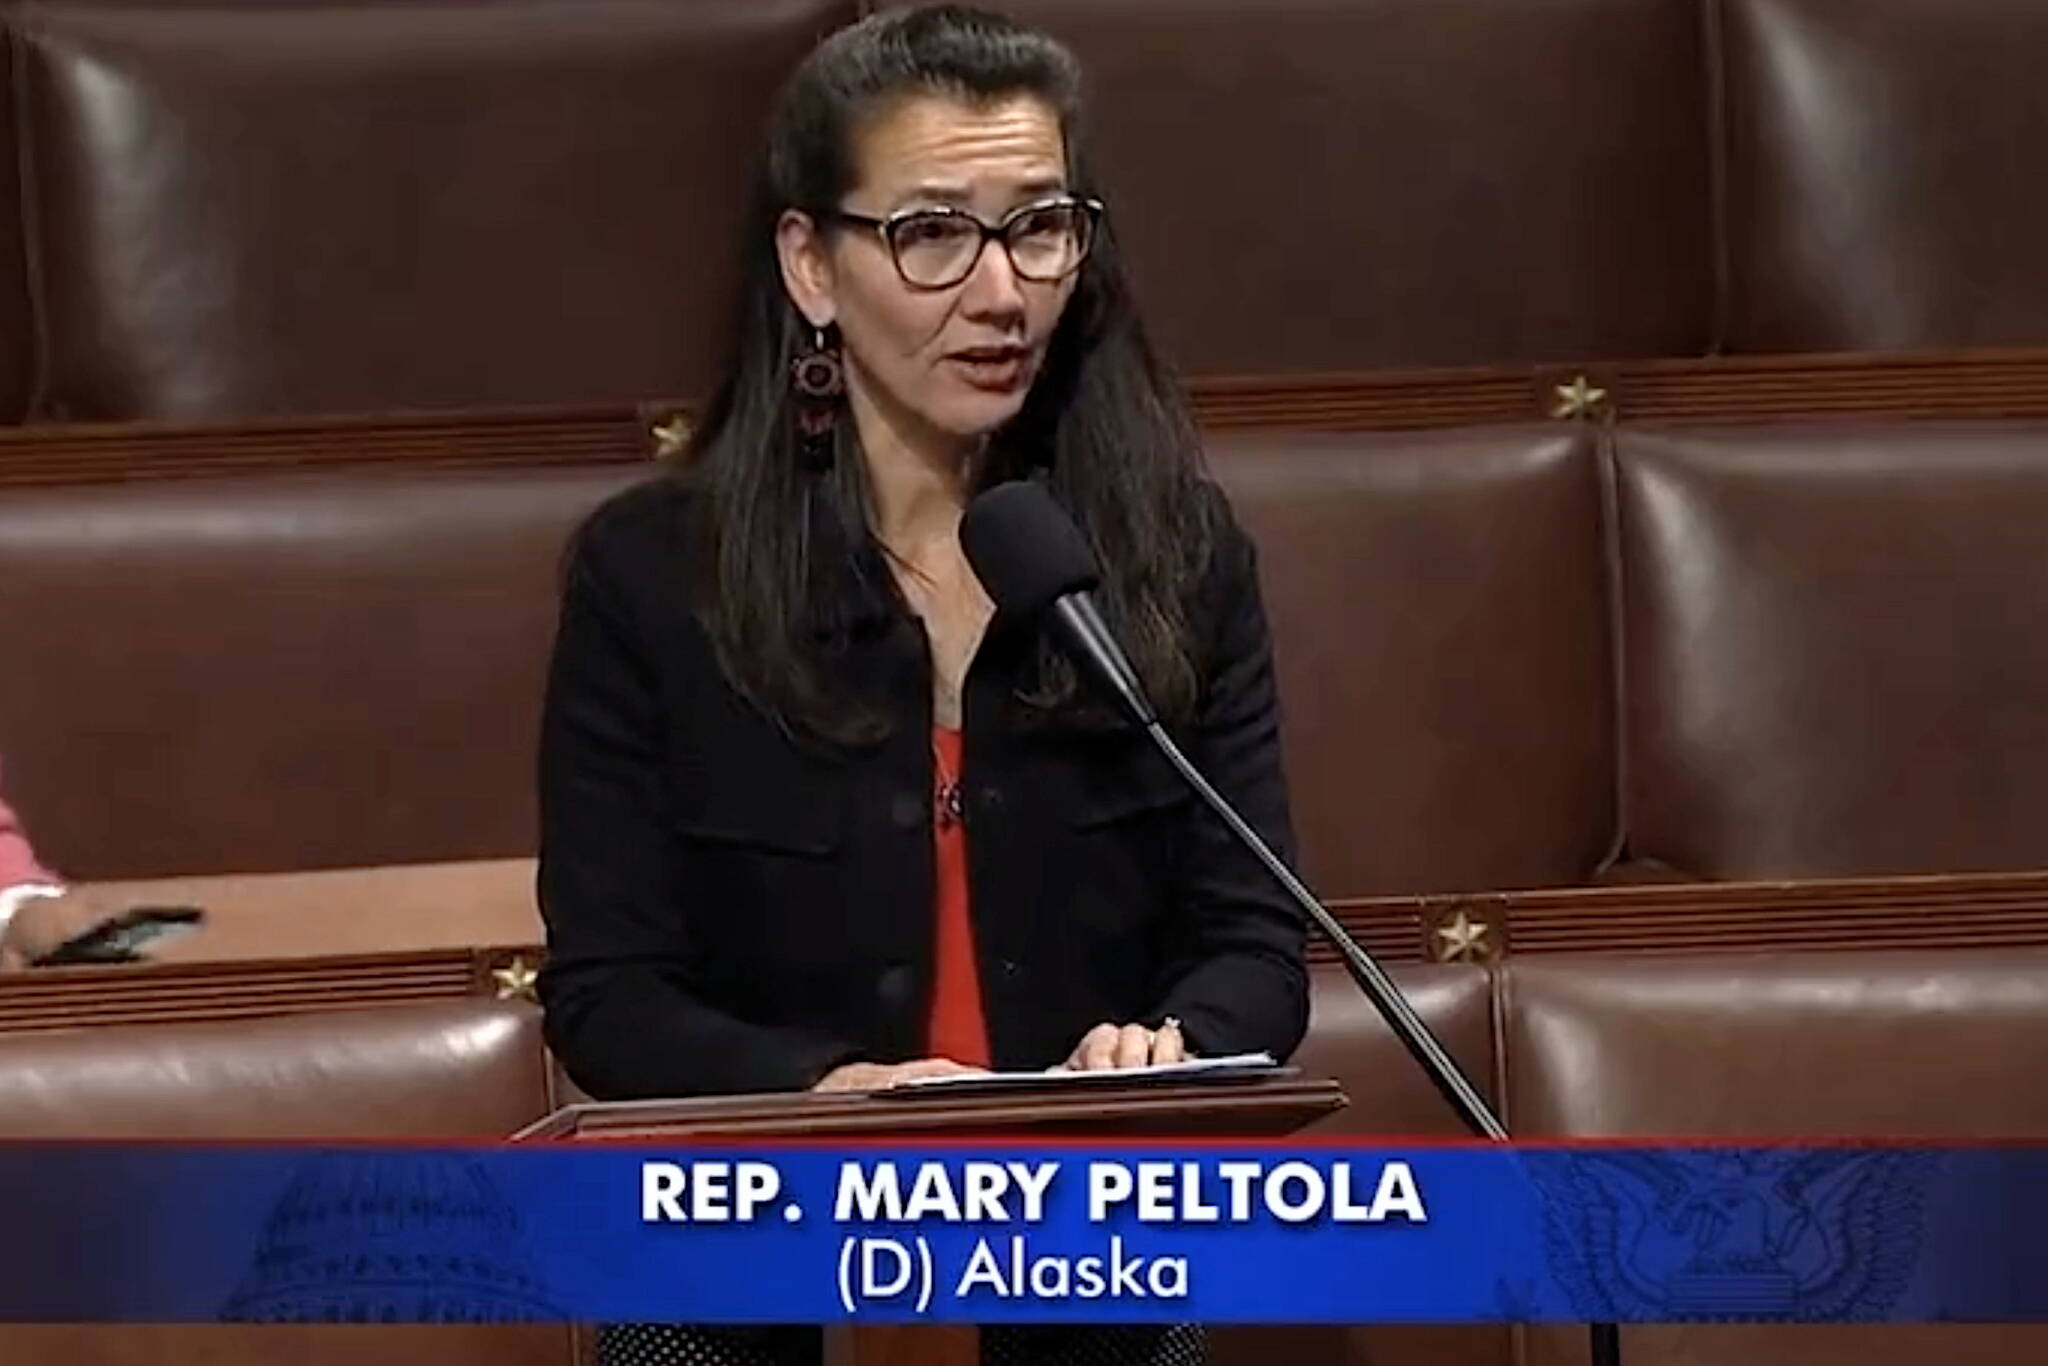 Rep. Mary Peltola, an Alaska Democrat, delivers a speech on the U.S. House floor before Thursday’s vote approving her first bill, establishing an Office of Food Security in the Department of Veterans Affairs. It passed the House by a 376-49 vote, although its fate in the Senate is undetermined. (Screenshot / U.S. House video)